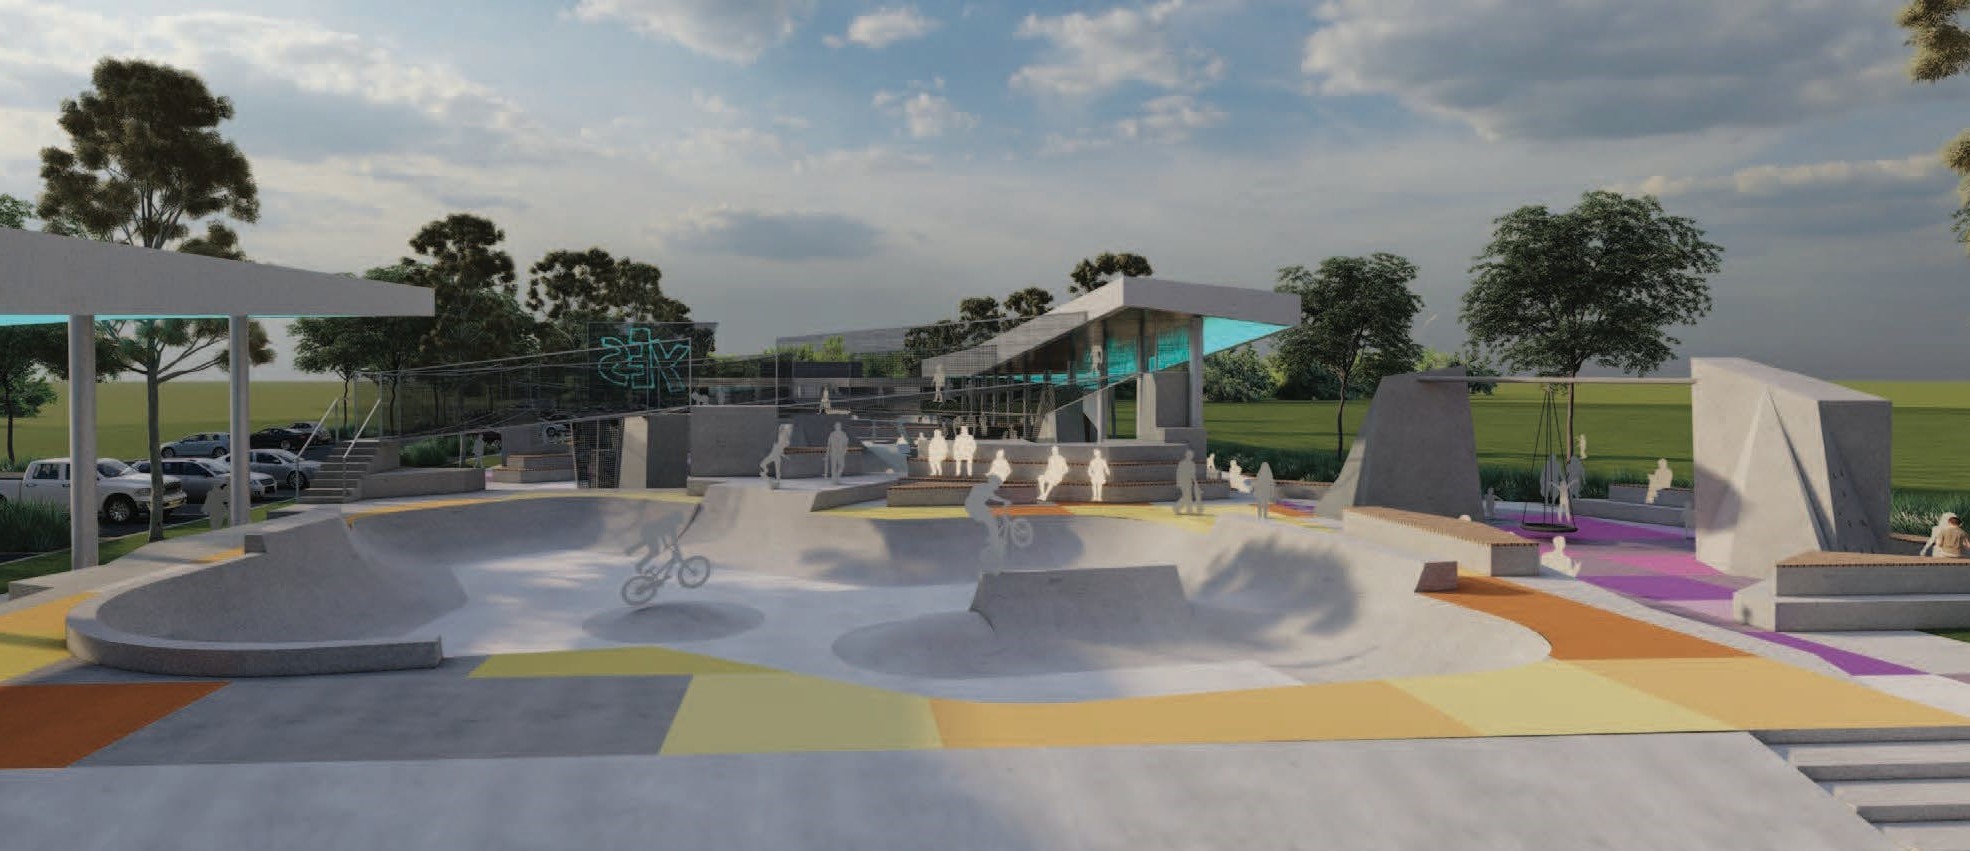 An artist's impression of the Youth Plaza skating area, with a bowl (only about a half metre deep) and several points of rest around